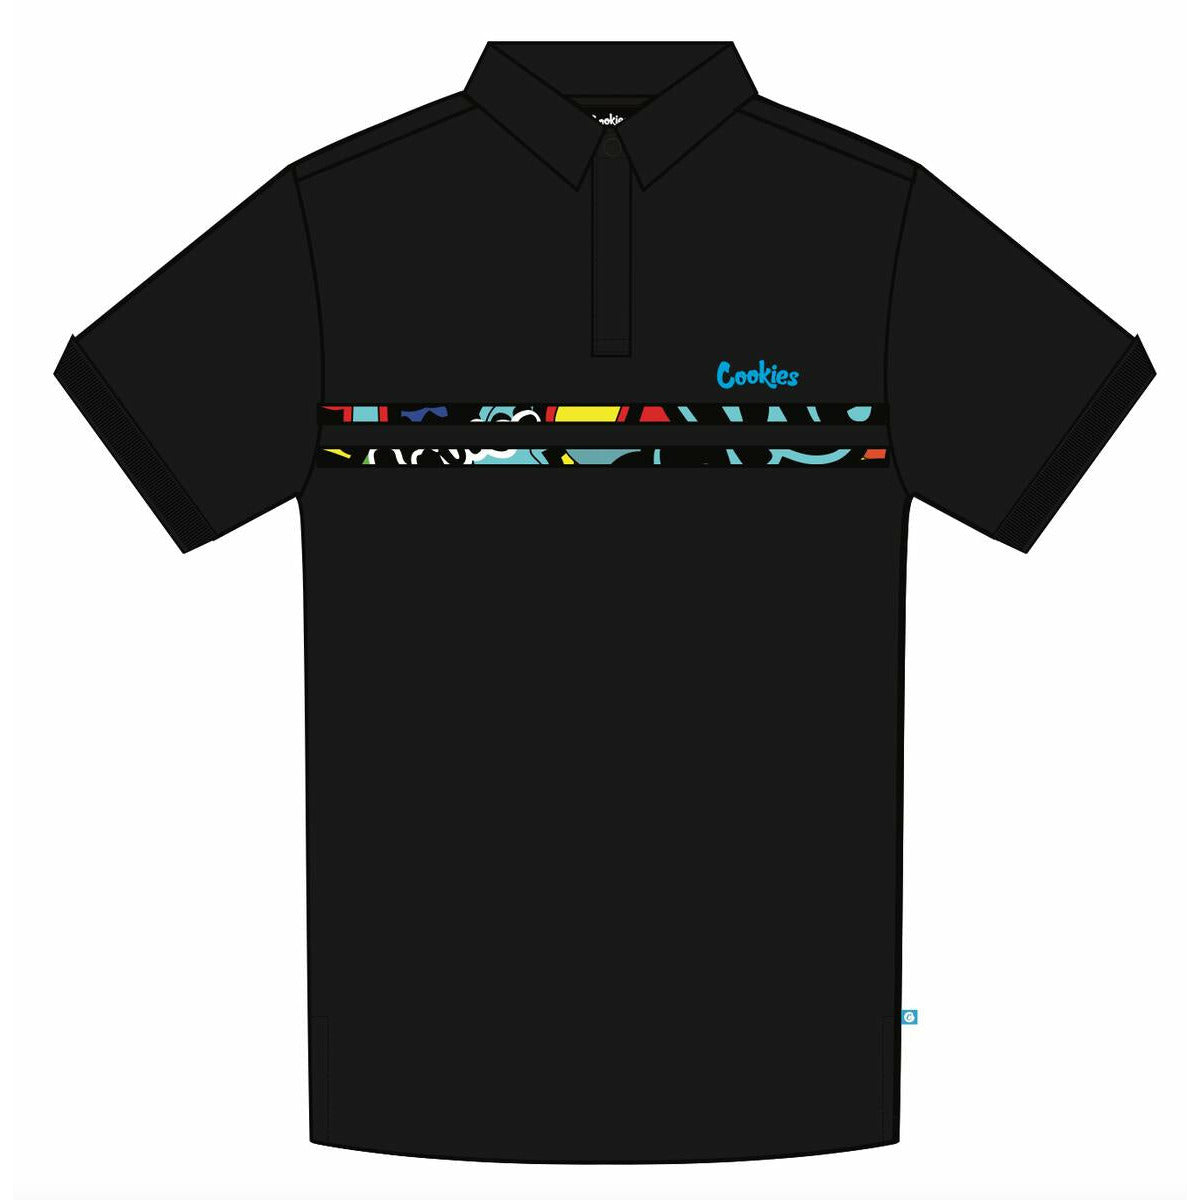 Cookies Stack It Up Striped Black Polo w/Embroidery (1550K4773)